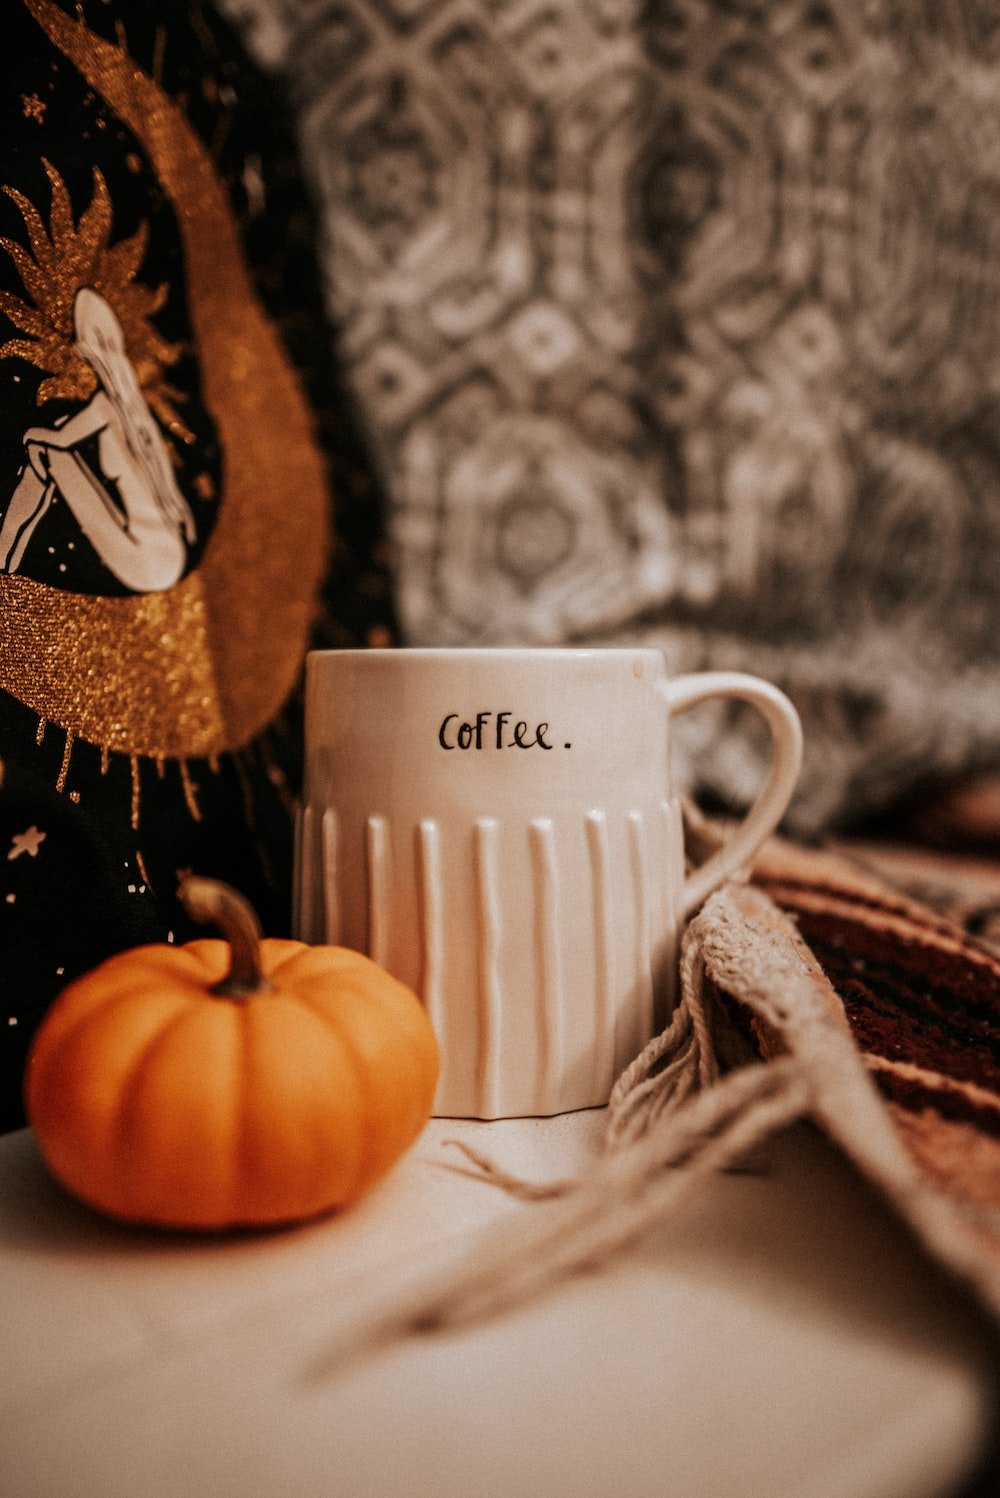 Cozy Autumn Picture. Download Free Image